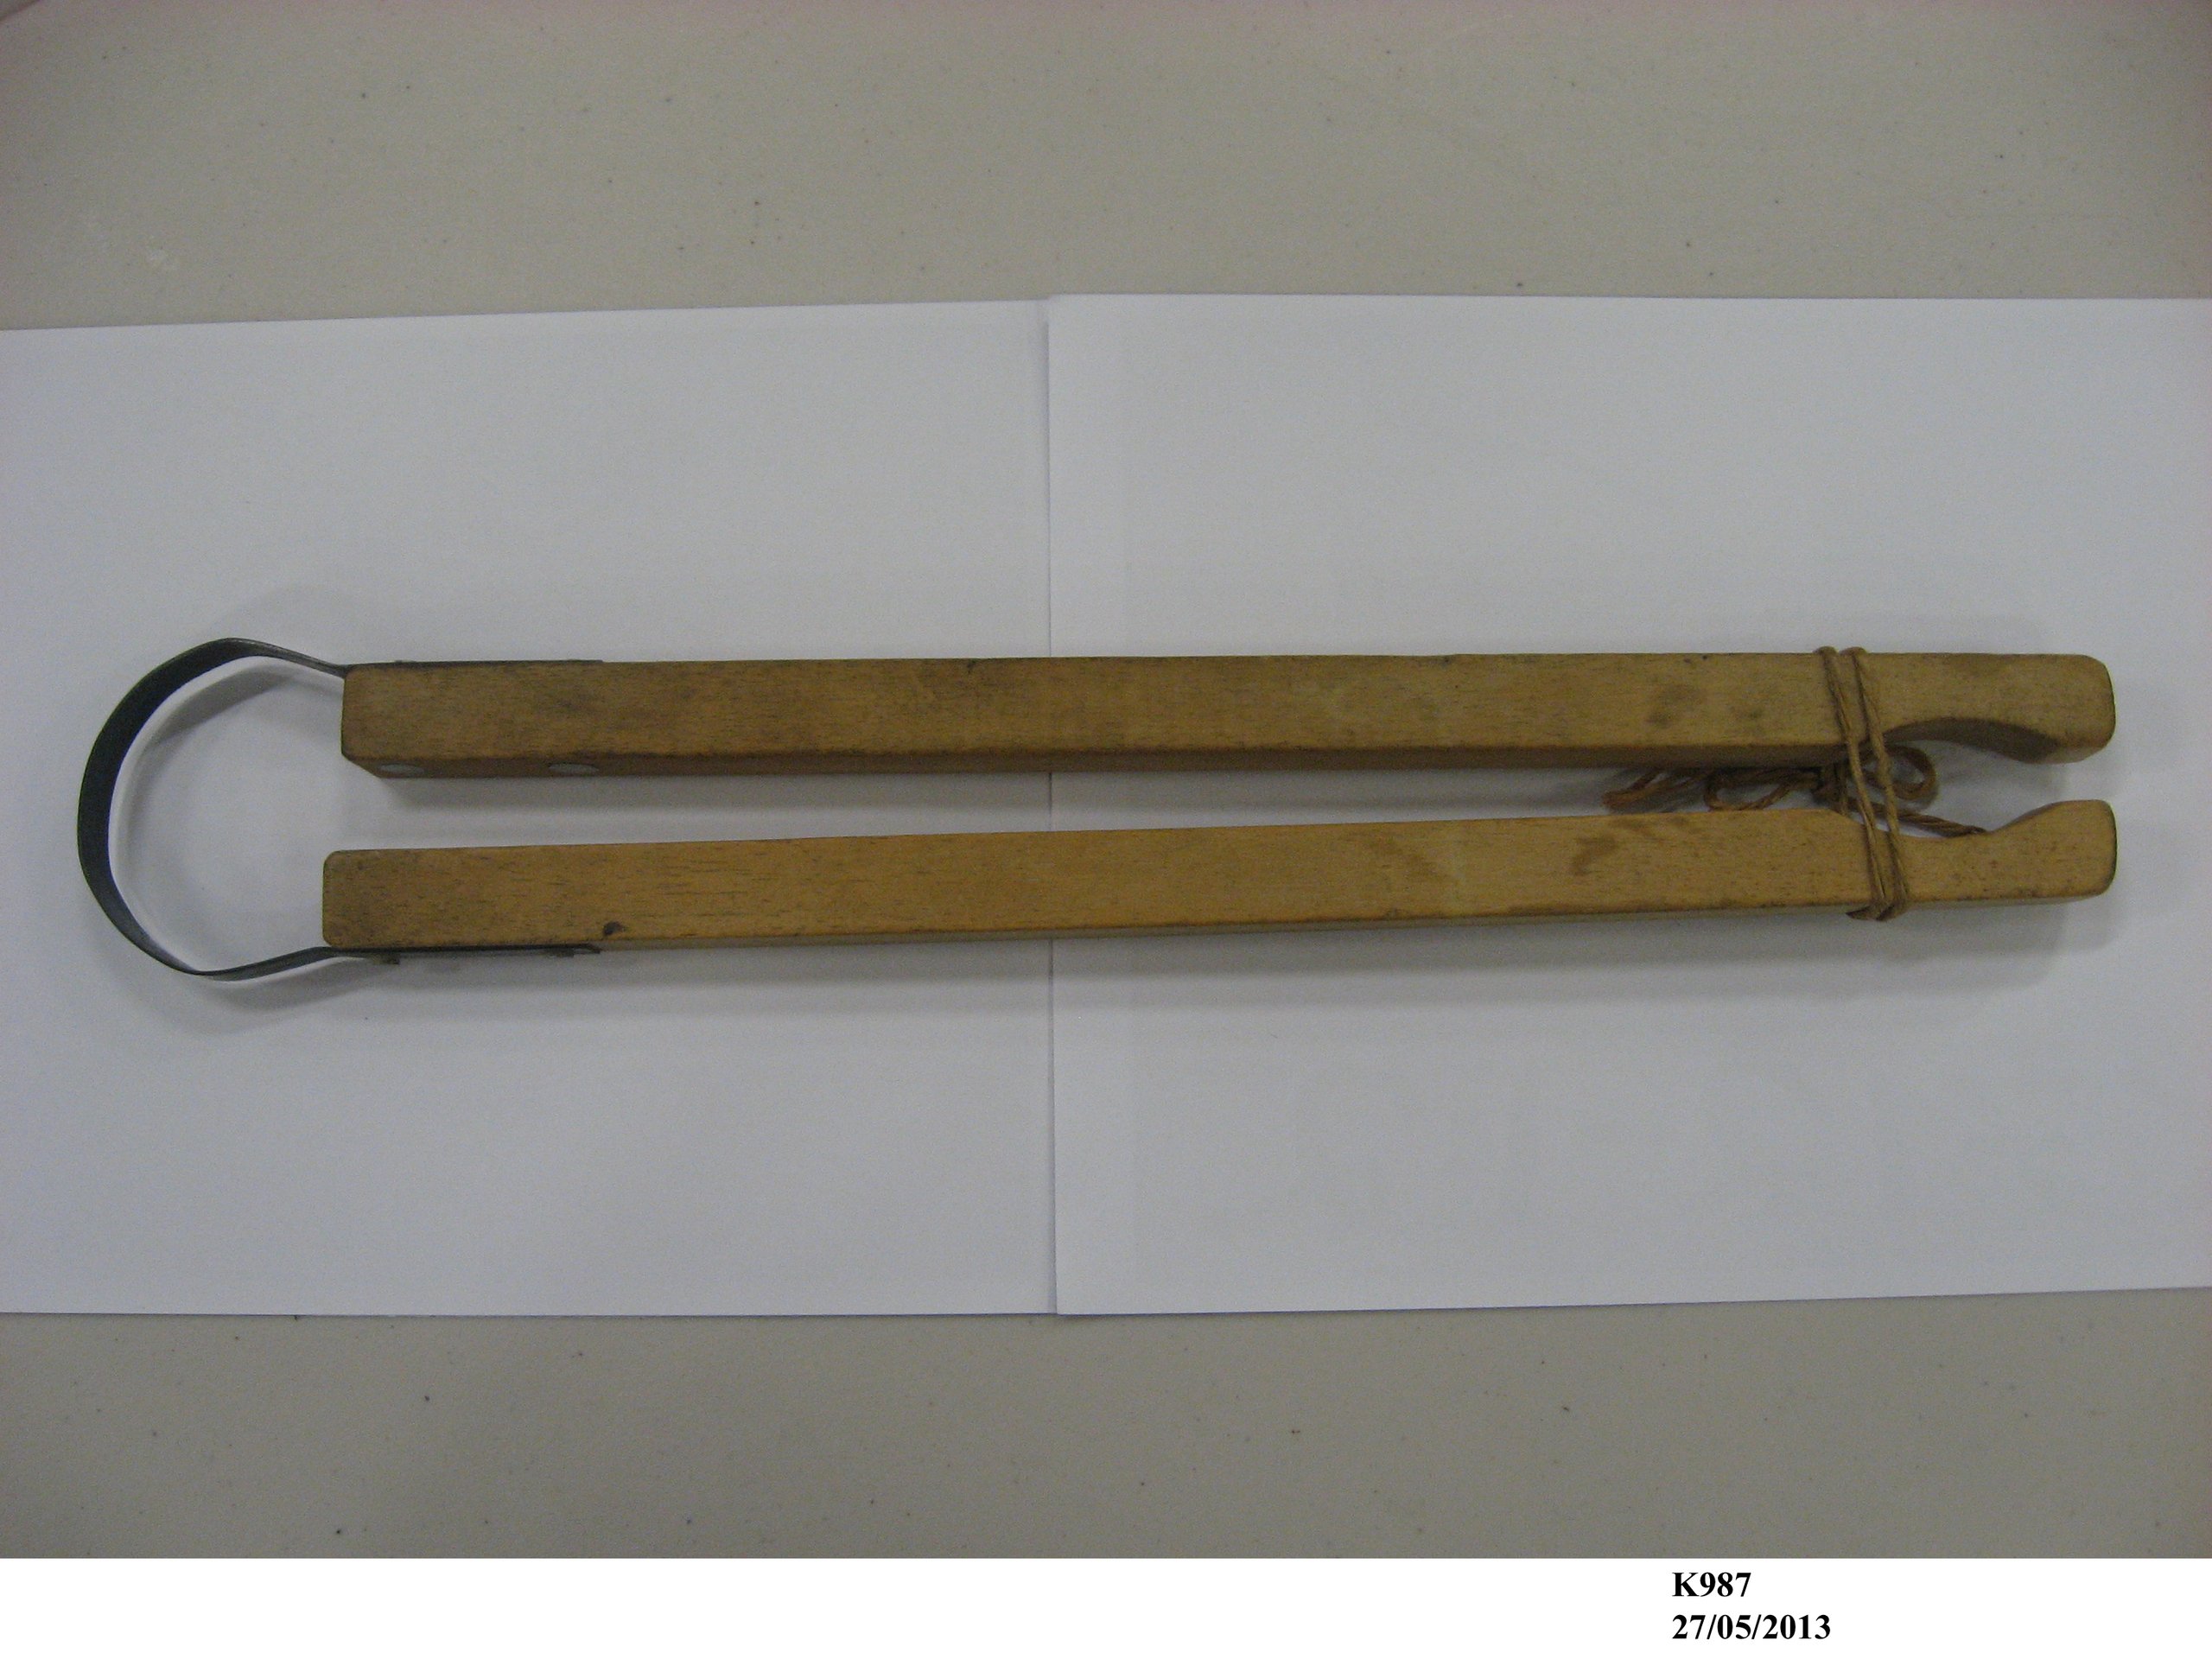 A pair of wooden laundry tongs.